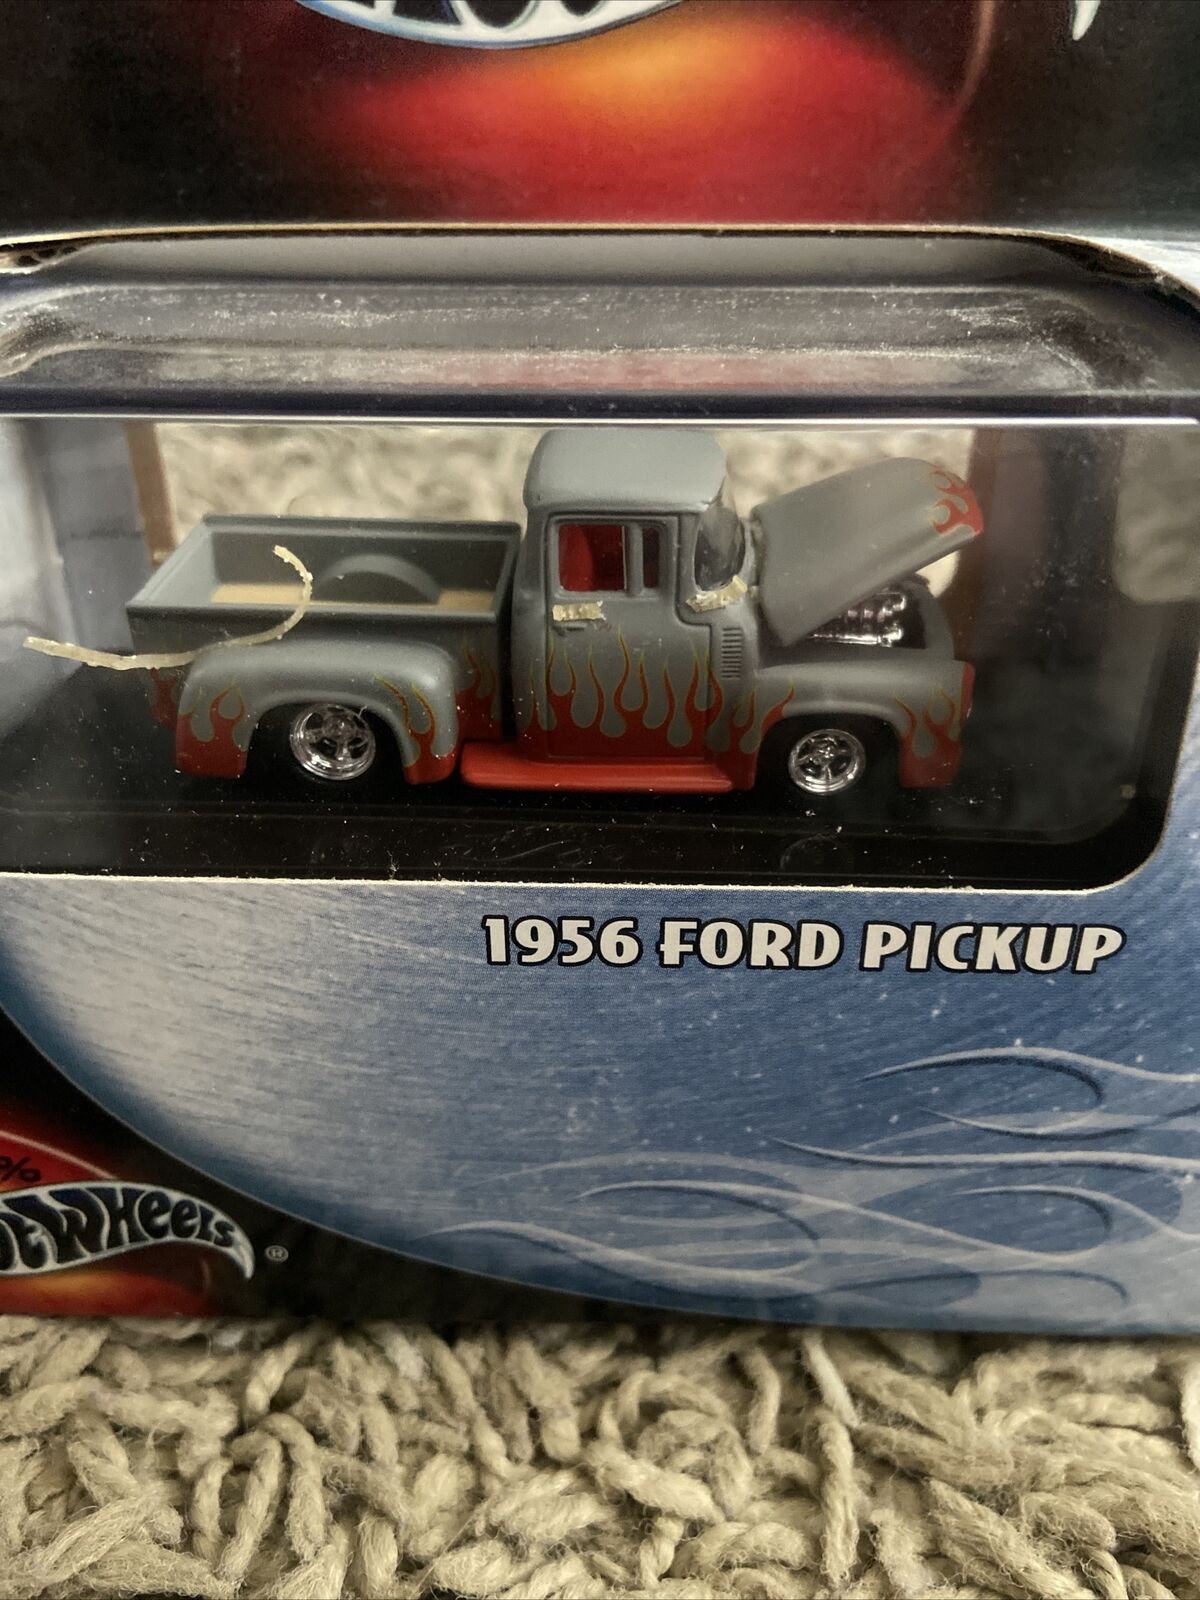 '56 Ford Pickup, 1/64 100% Hot Wheels, With Opening Features, Rubber Tires